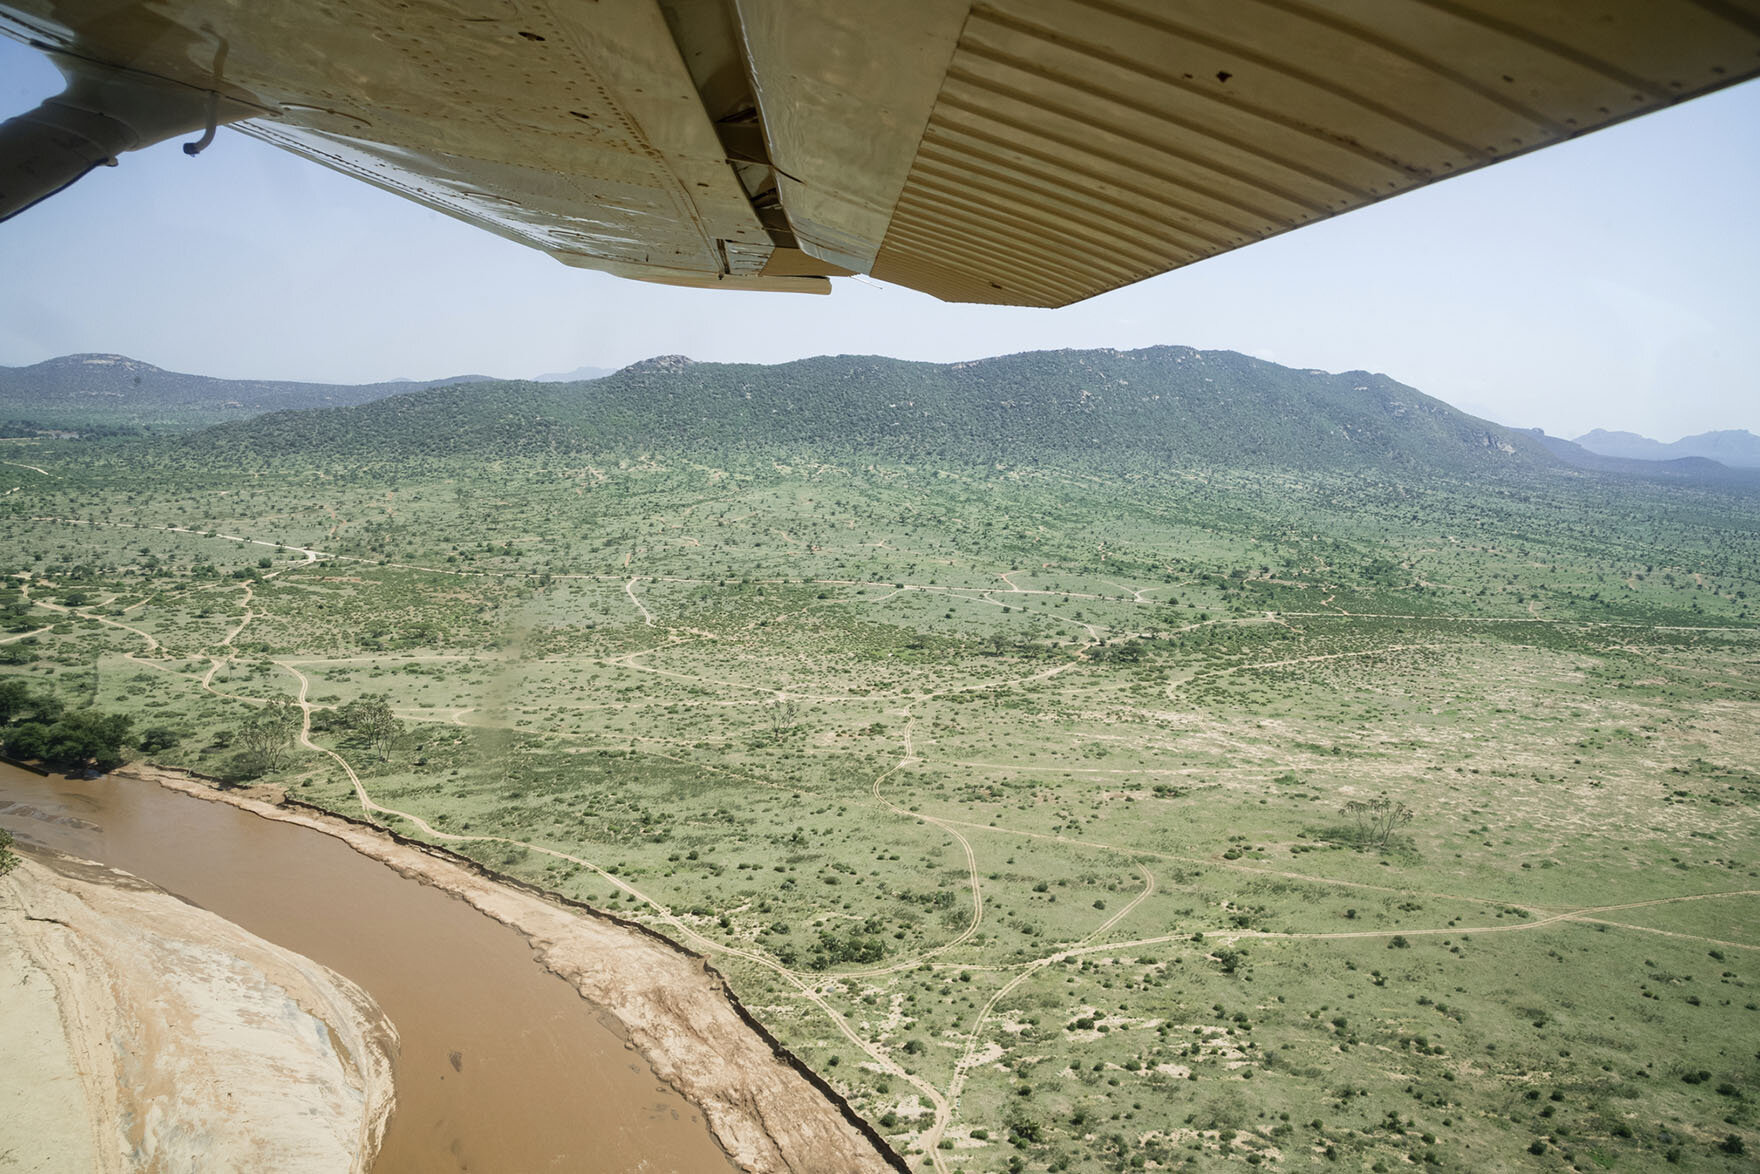  Panoramic view of the Masai Mara from a single engine plane flying over a mountainous river valley 